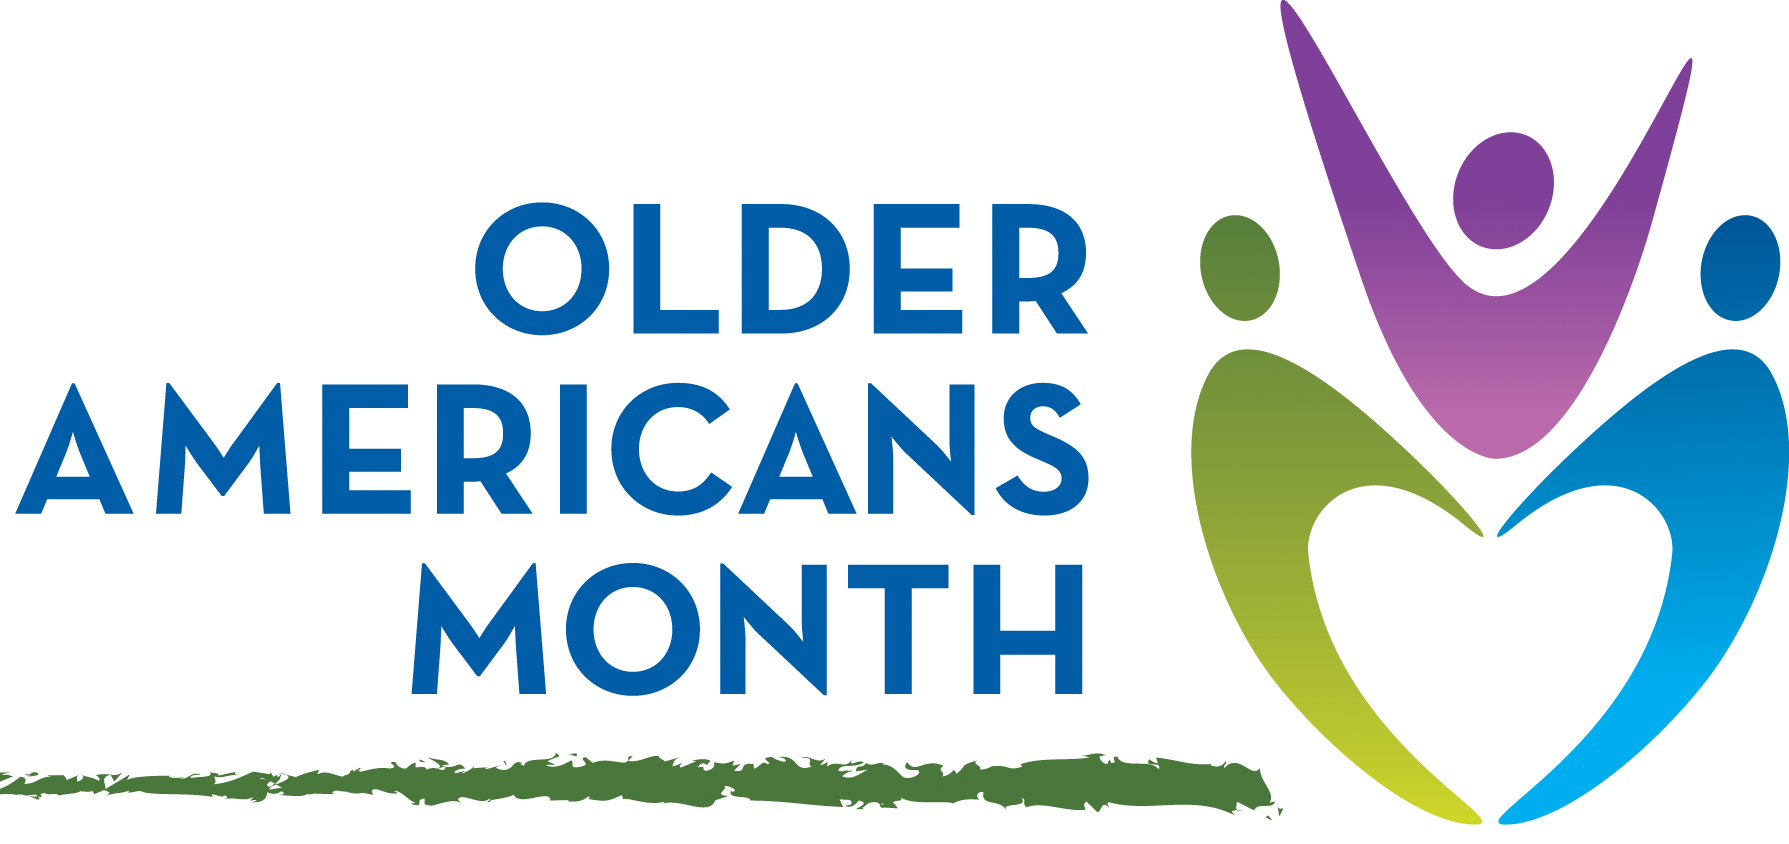 Older Americans Month 2018 – Engage at Every Age